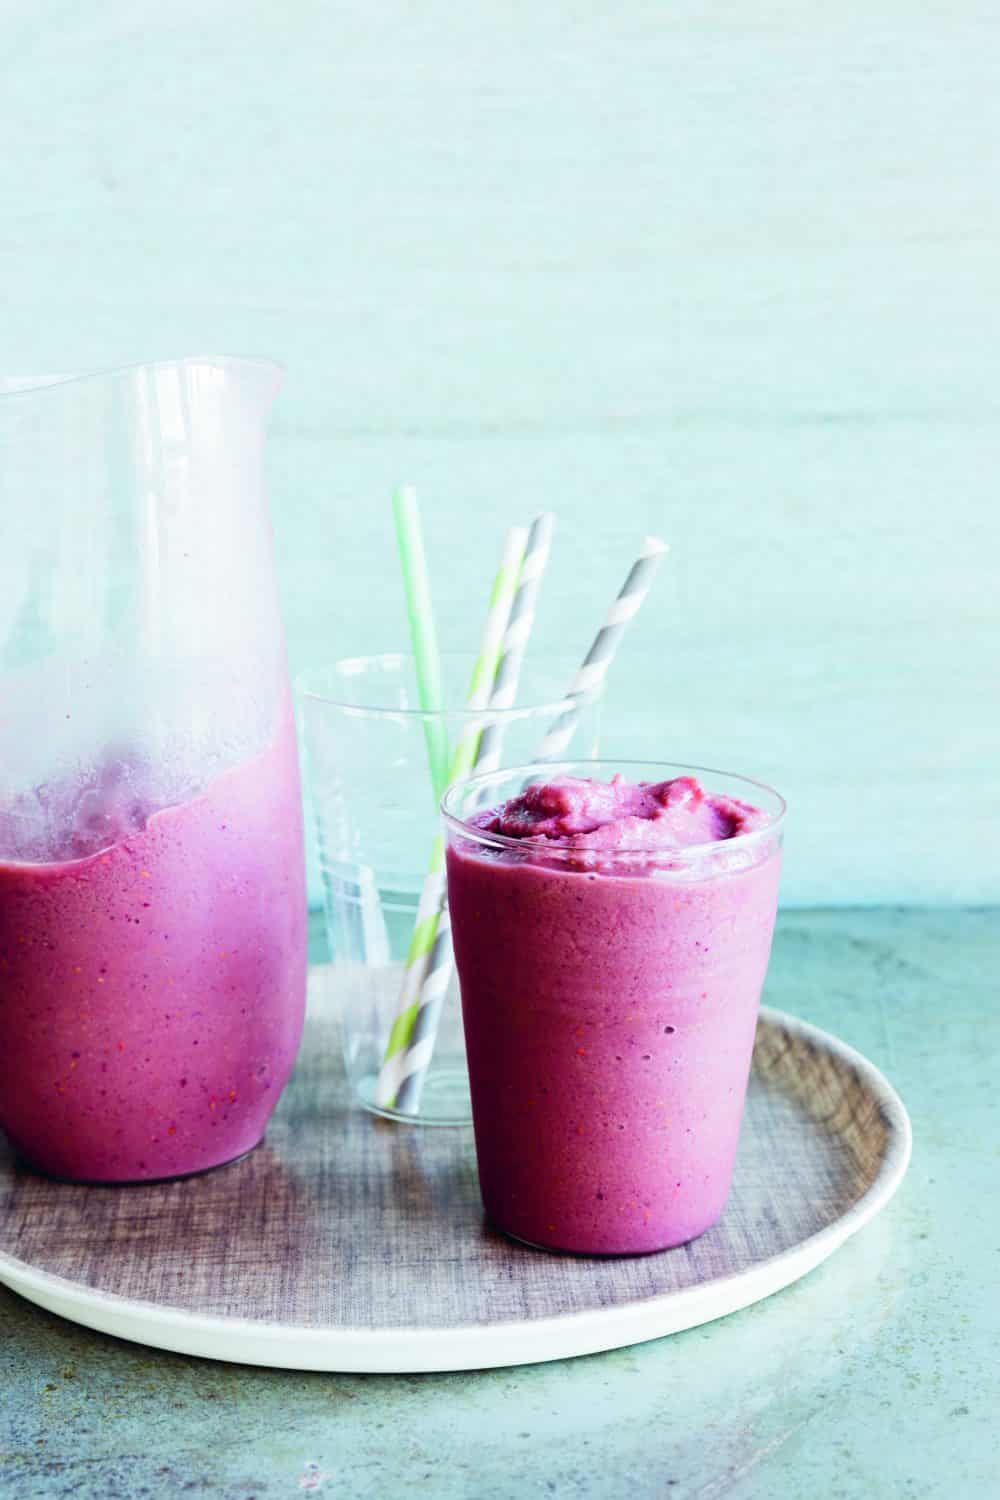 ACAI AND MIXED BERRY SMOOTHIE